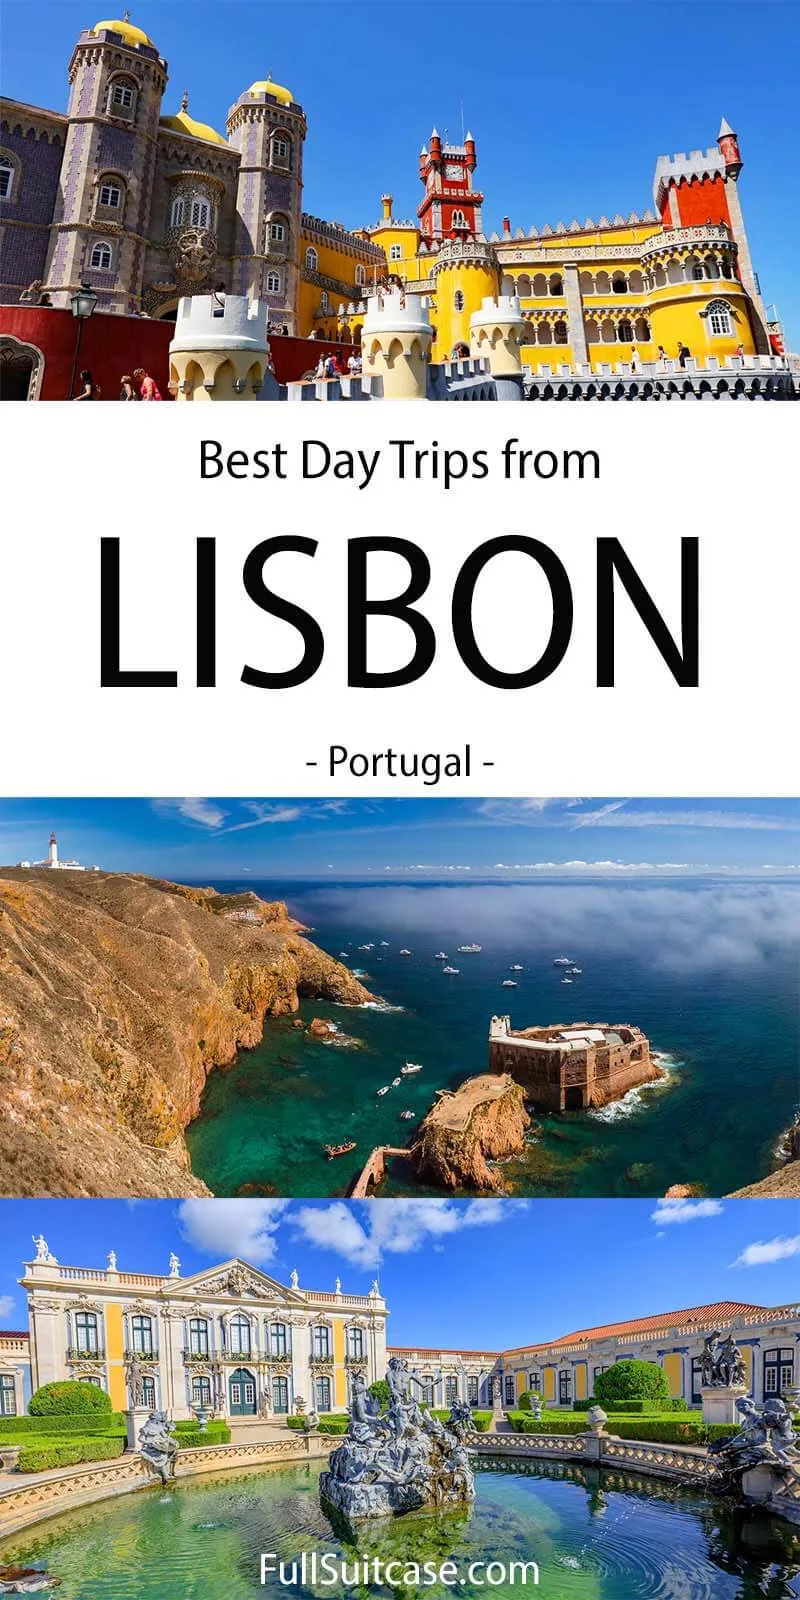 Best places to visit on a day trip near Lisbon, Portugal